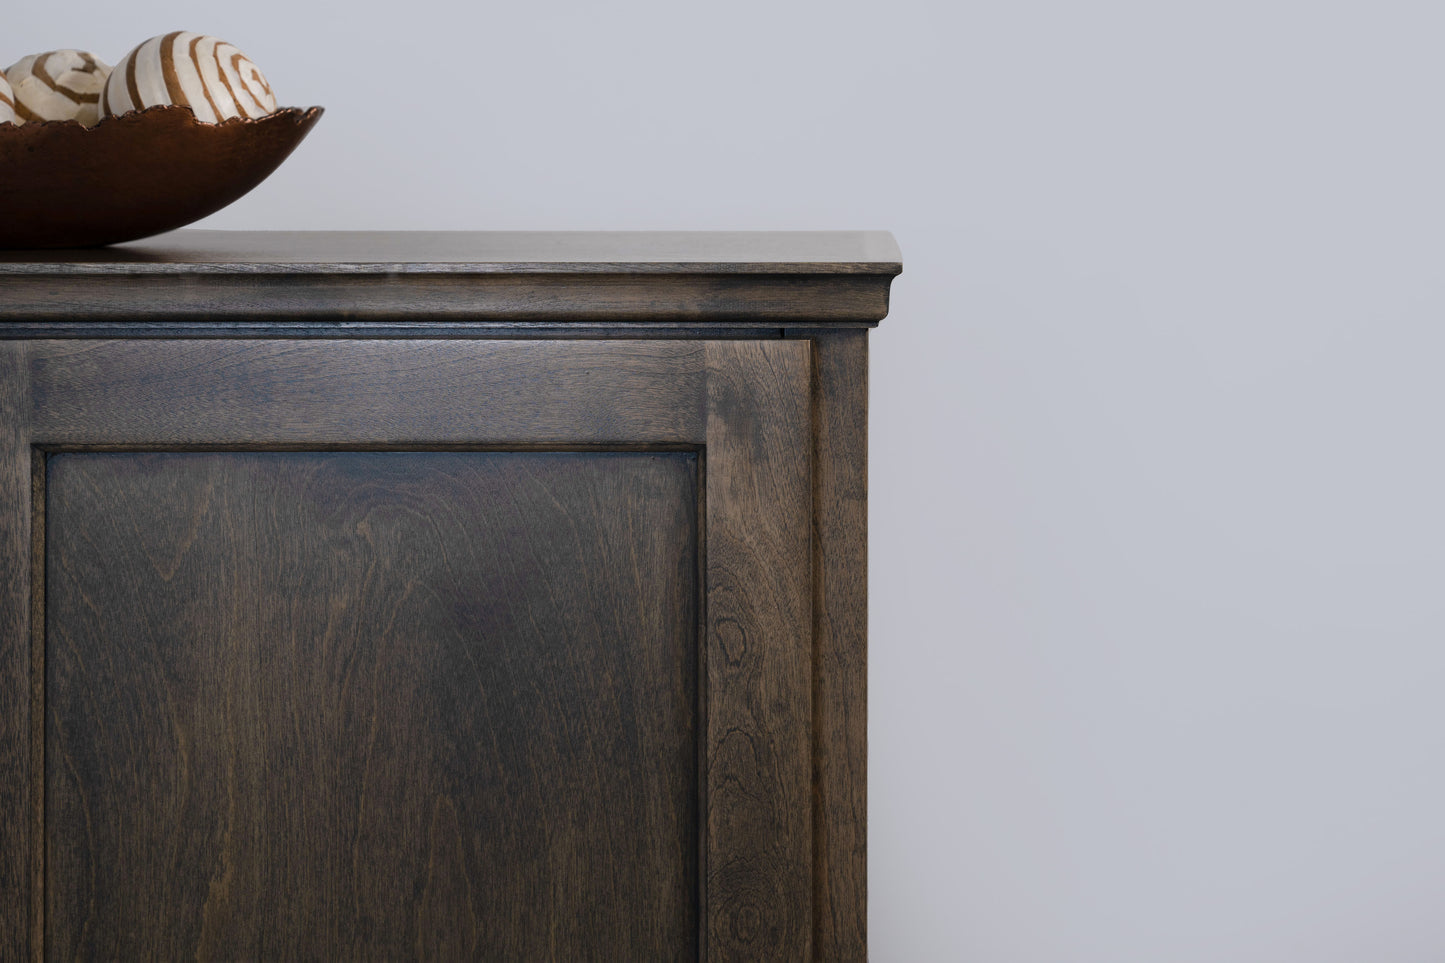 Berkshire Plymouth Cabinet shown in Foggy Oak finish, shown close up to highlight crown moulding details.